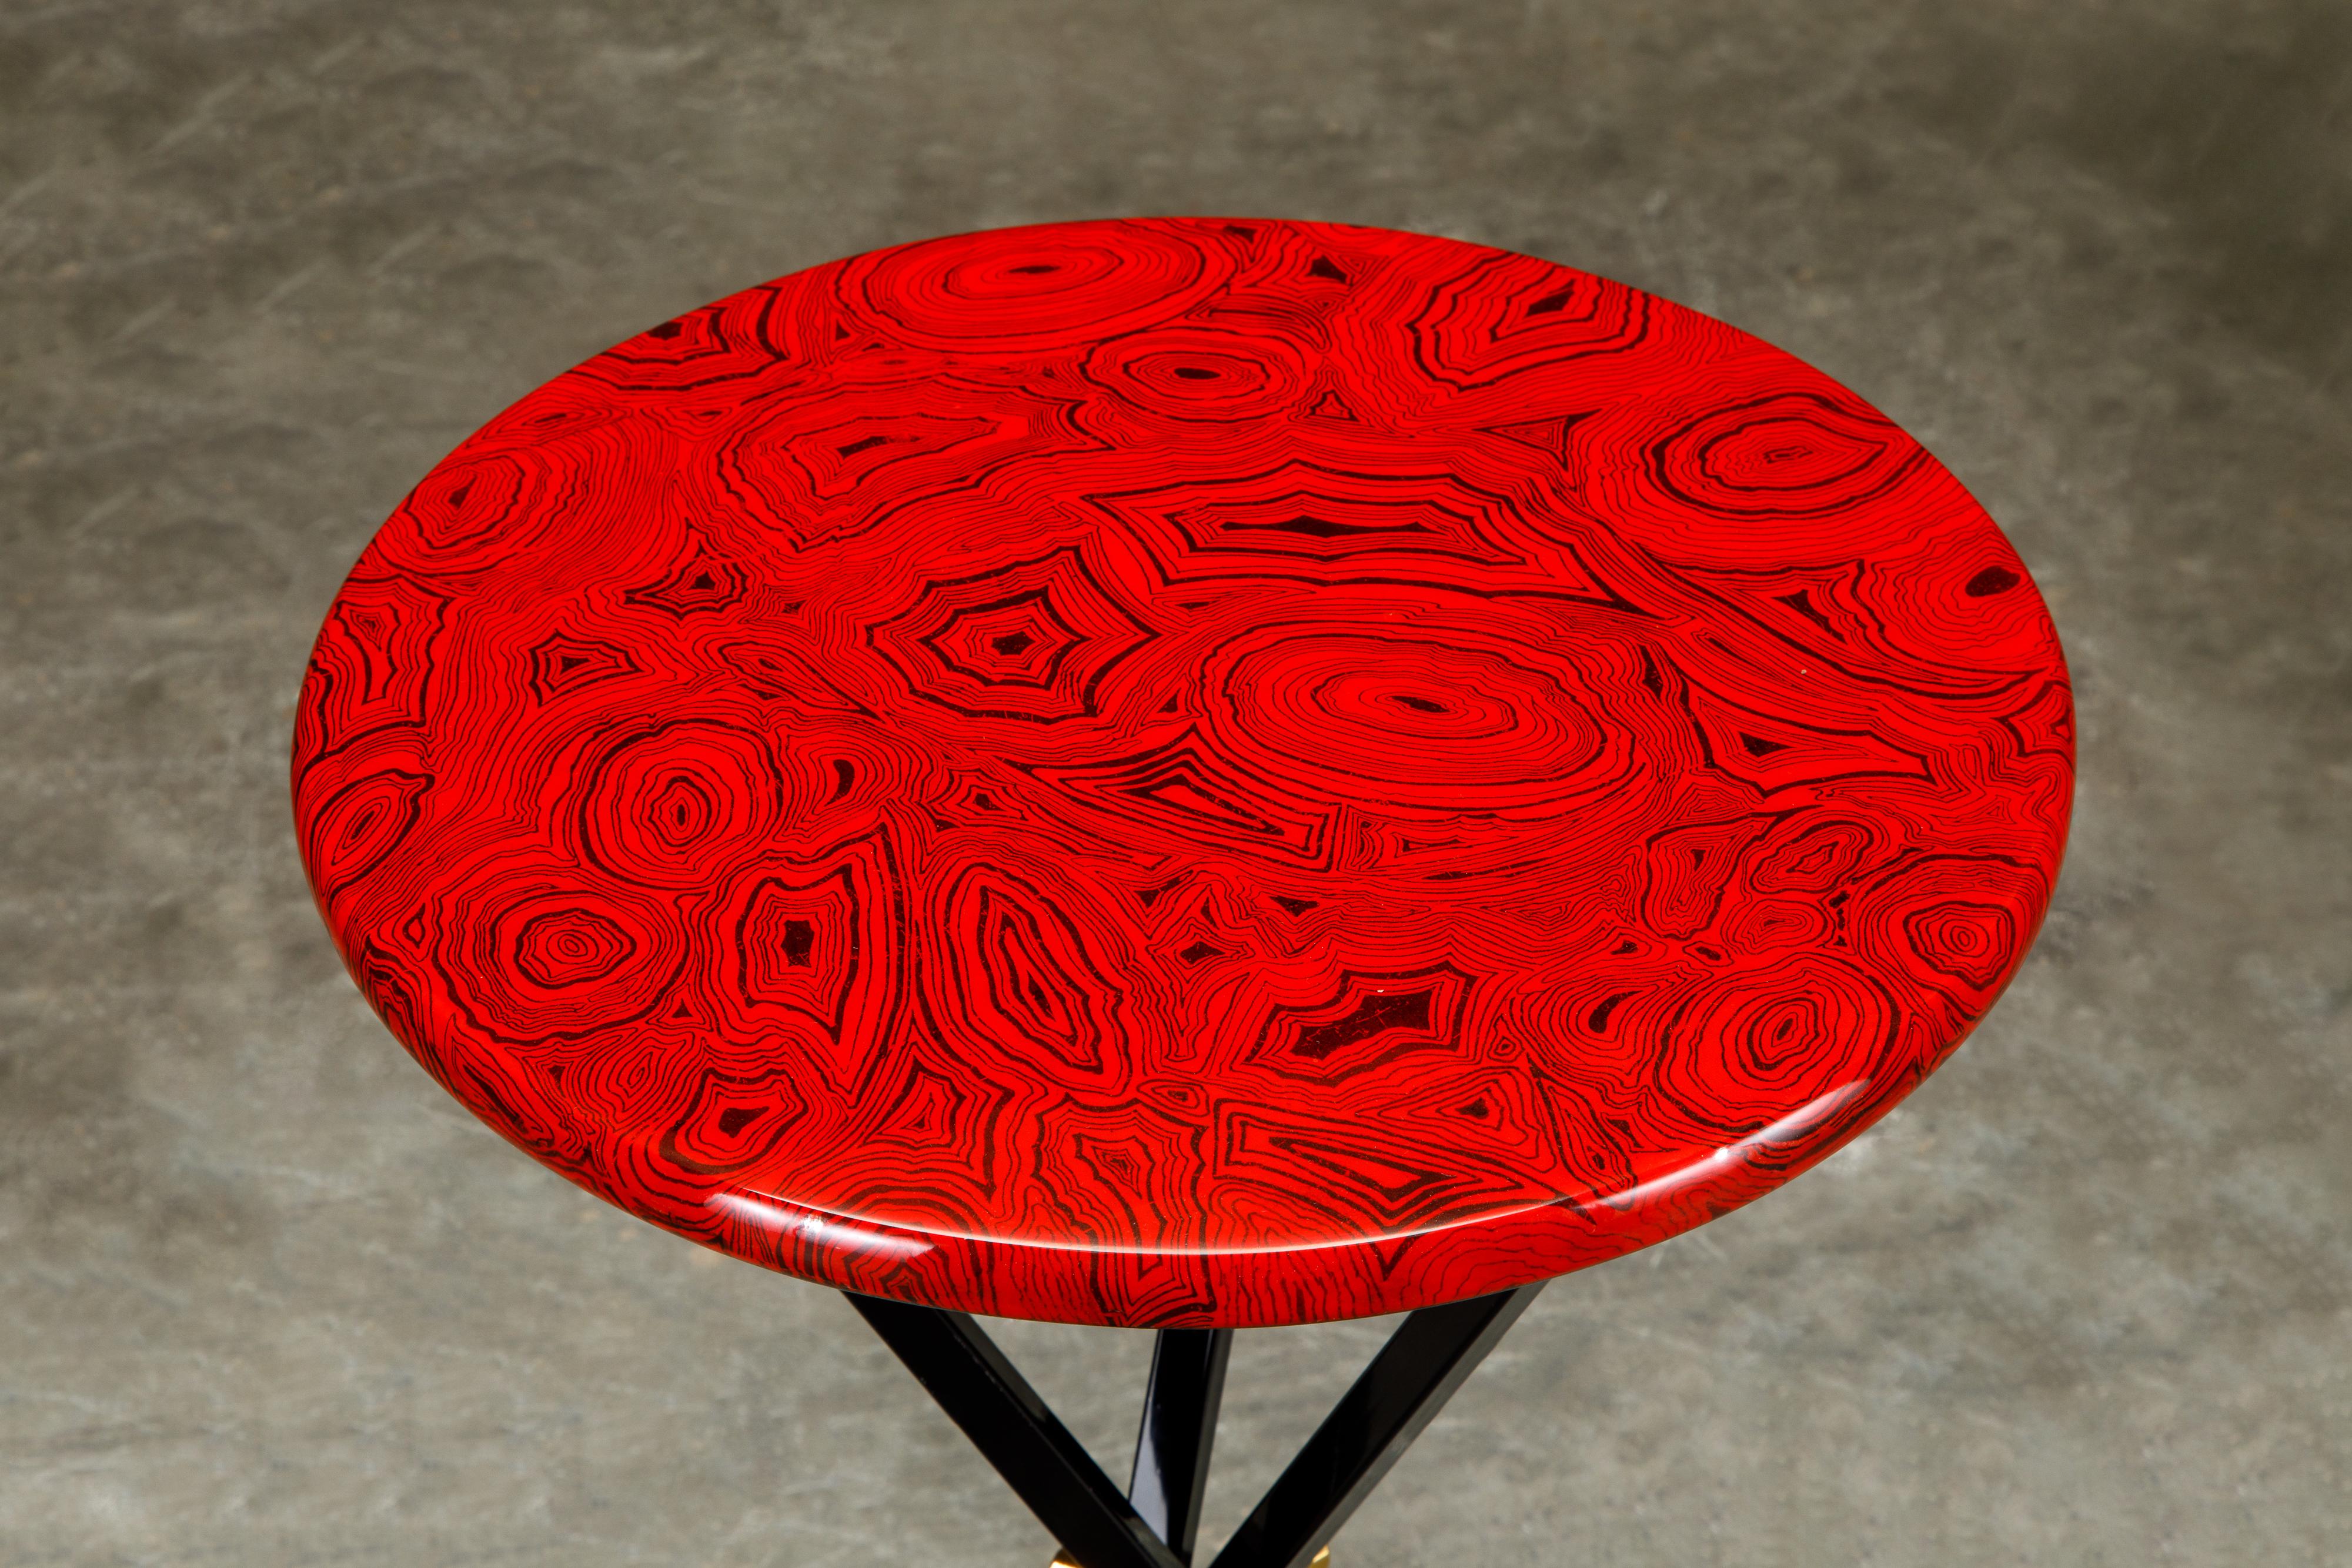 Brass 'Red Malachite' Drinks Table by Piero Fornasetti, circa 1970s, Signed 